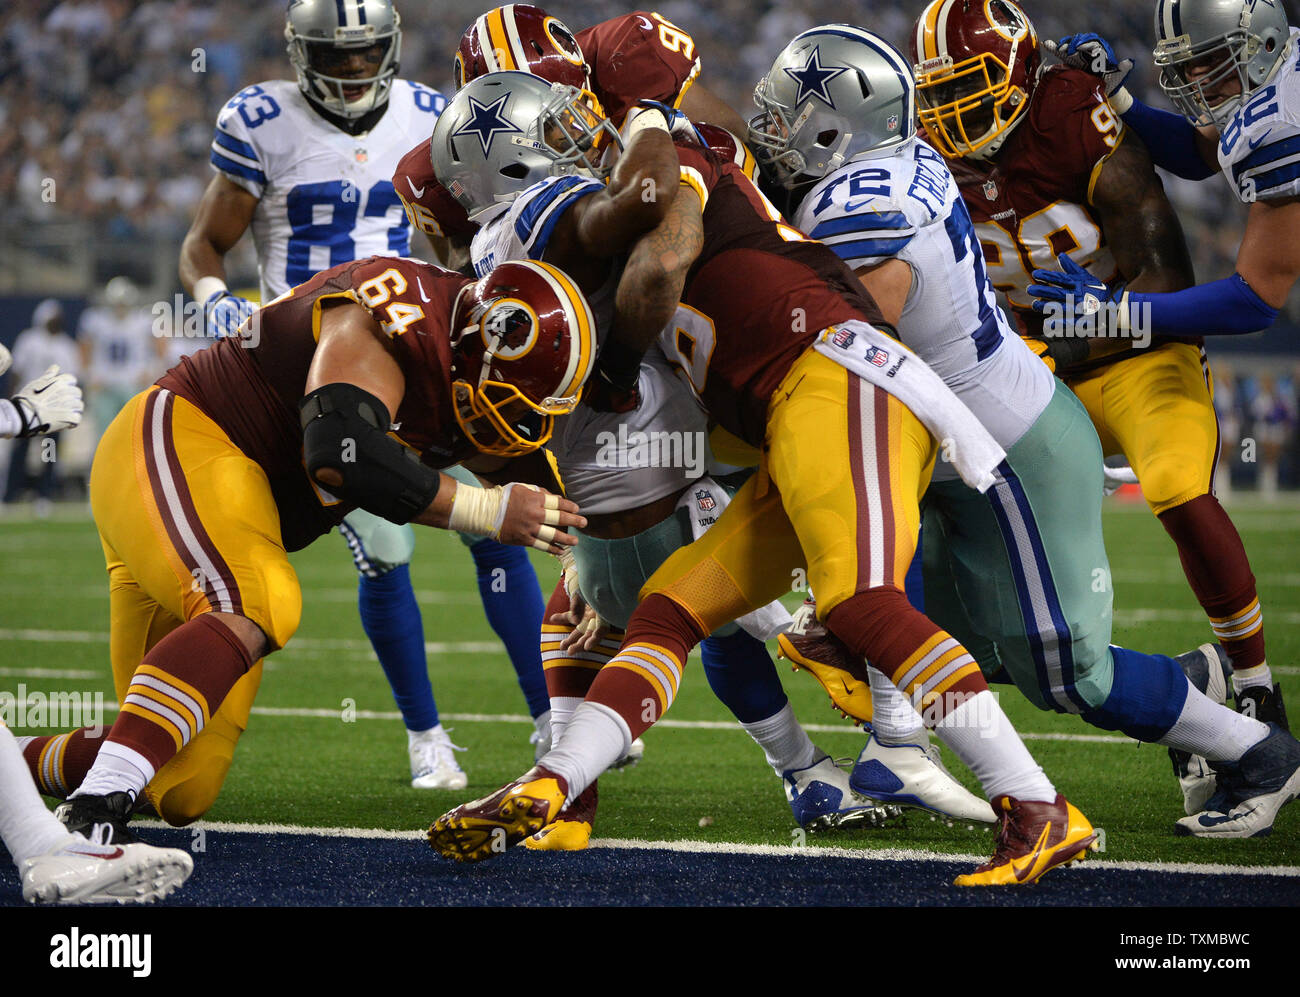 Dallas Cowboys Joseph Randle runs for a 1-yard touchdown against the Washington Redskins in the fourth quarter at AT&T Stadium in Arlington, Texas on October 13, 2013. UPI/Kevin Dietsch Stock Photo